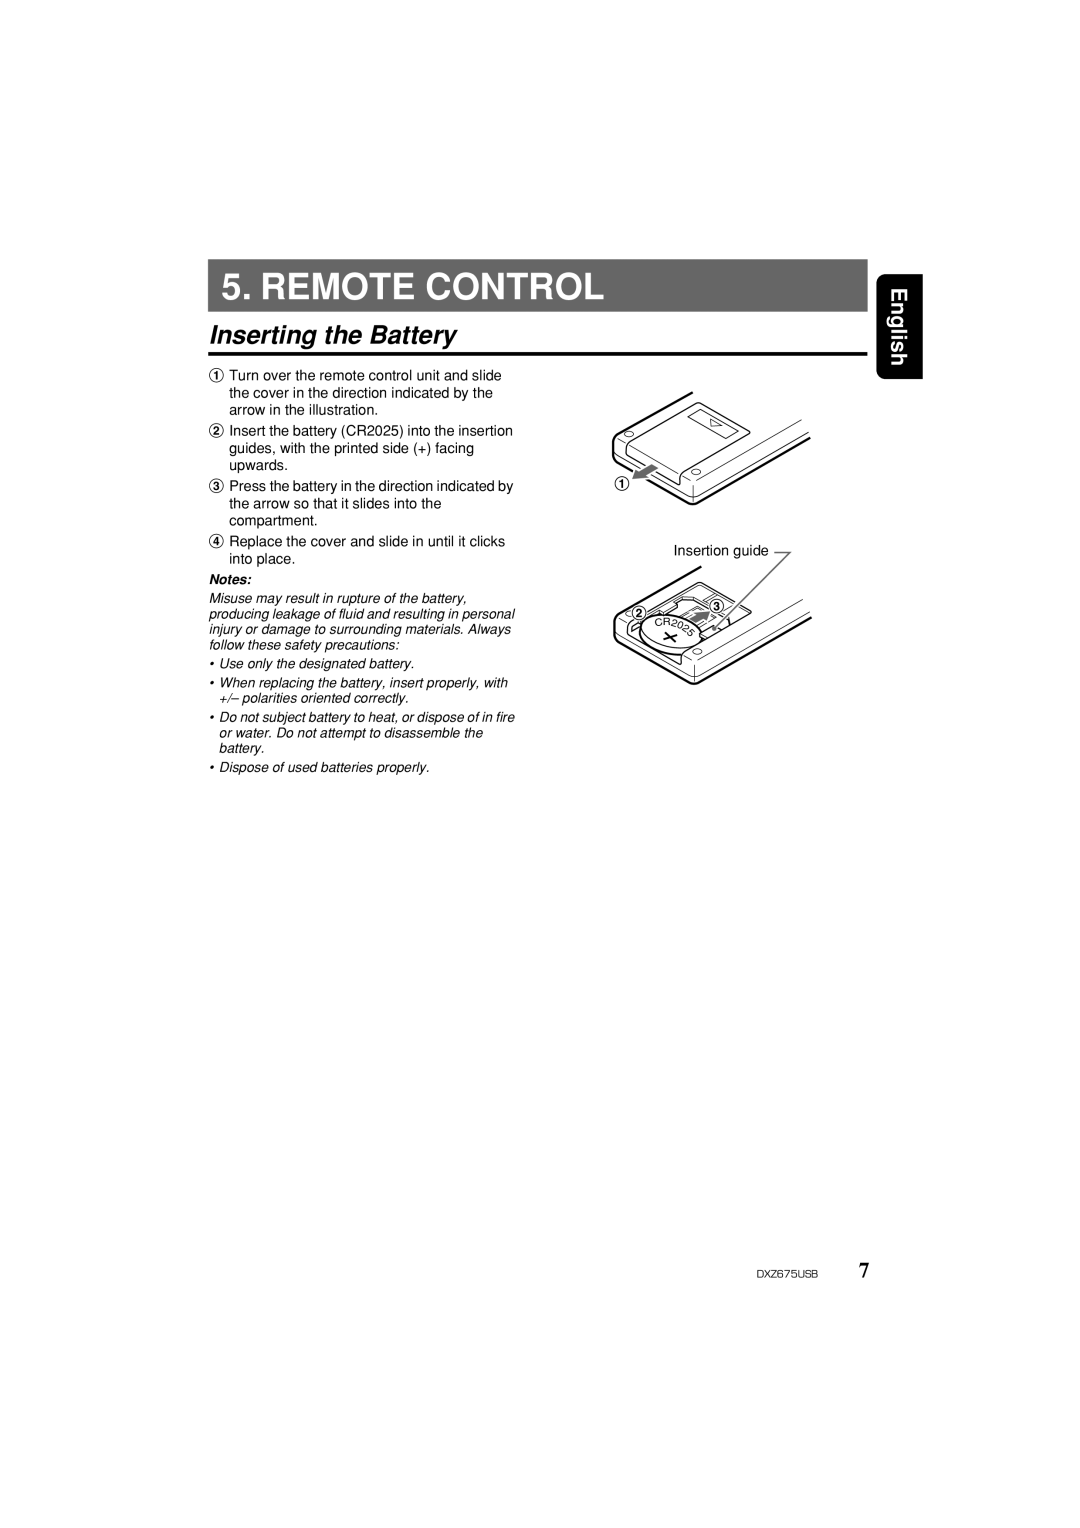 Clarion DXZ675USB owner manual Remote Control, Inserting the Battery, English 